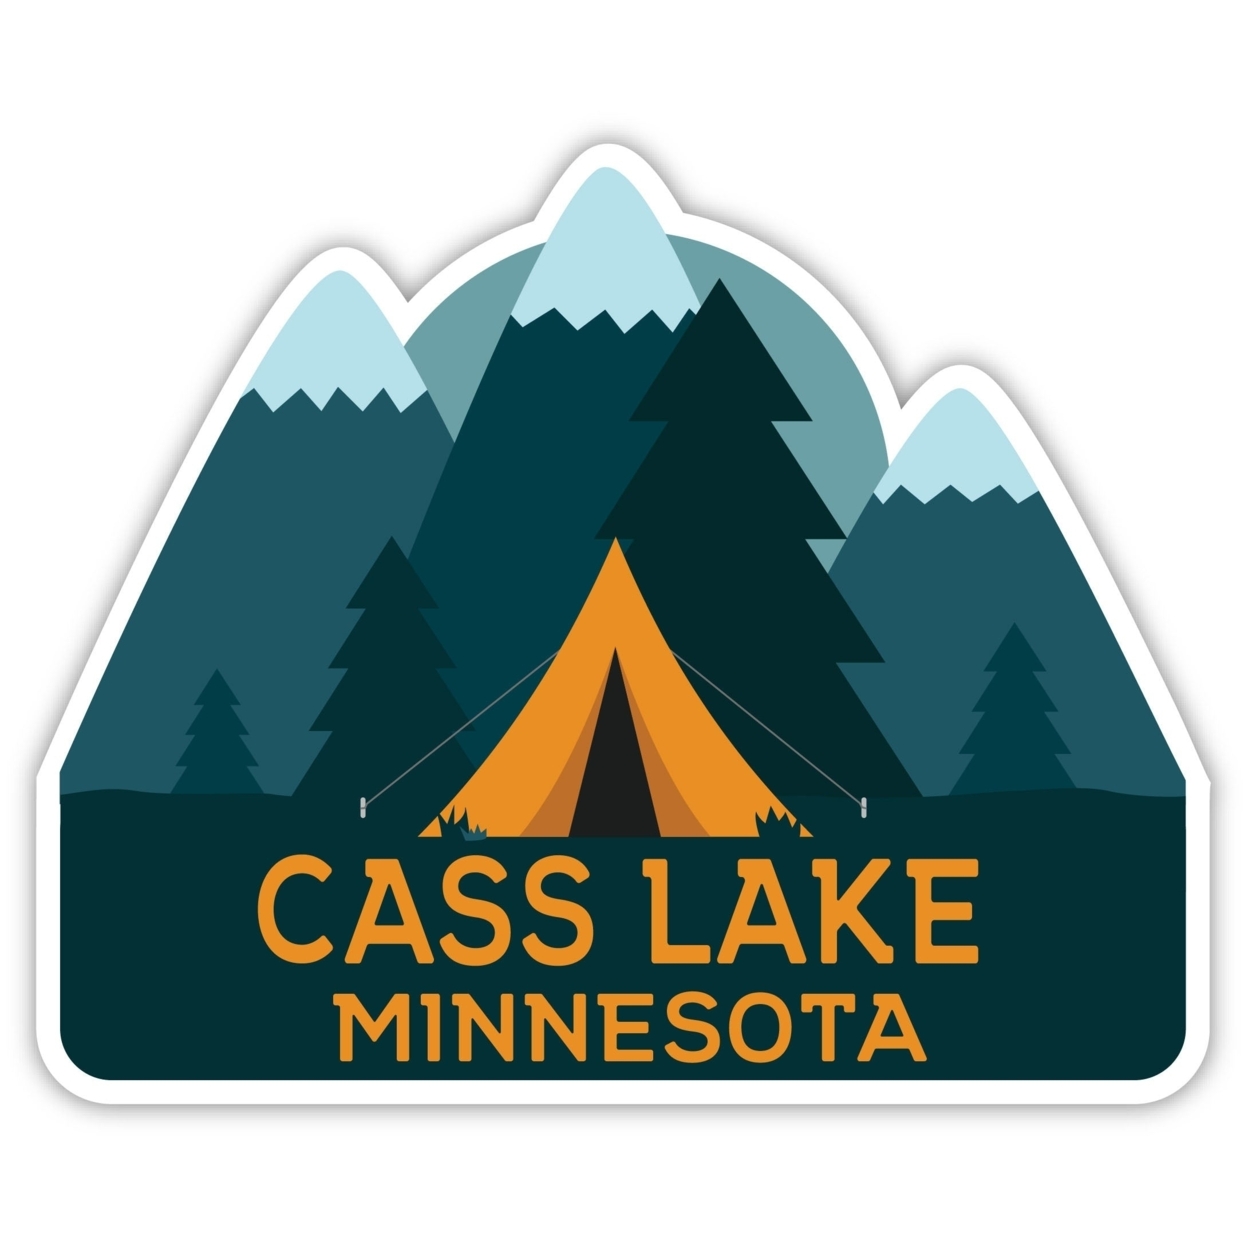 Cass Lake Minnesota Souvenir Decorative Stickers (Choose Theme And Size) - Single Unit, 2-Inch, Great Outdoors